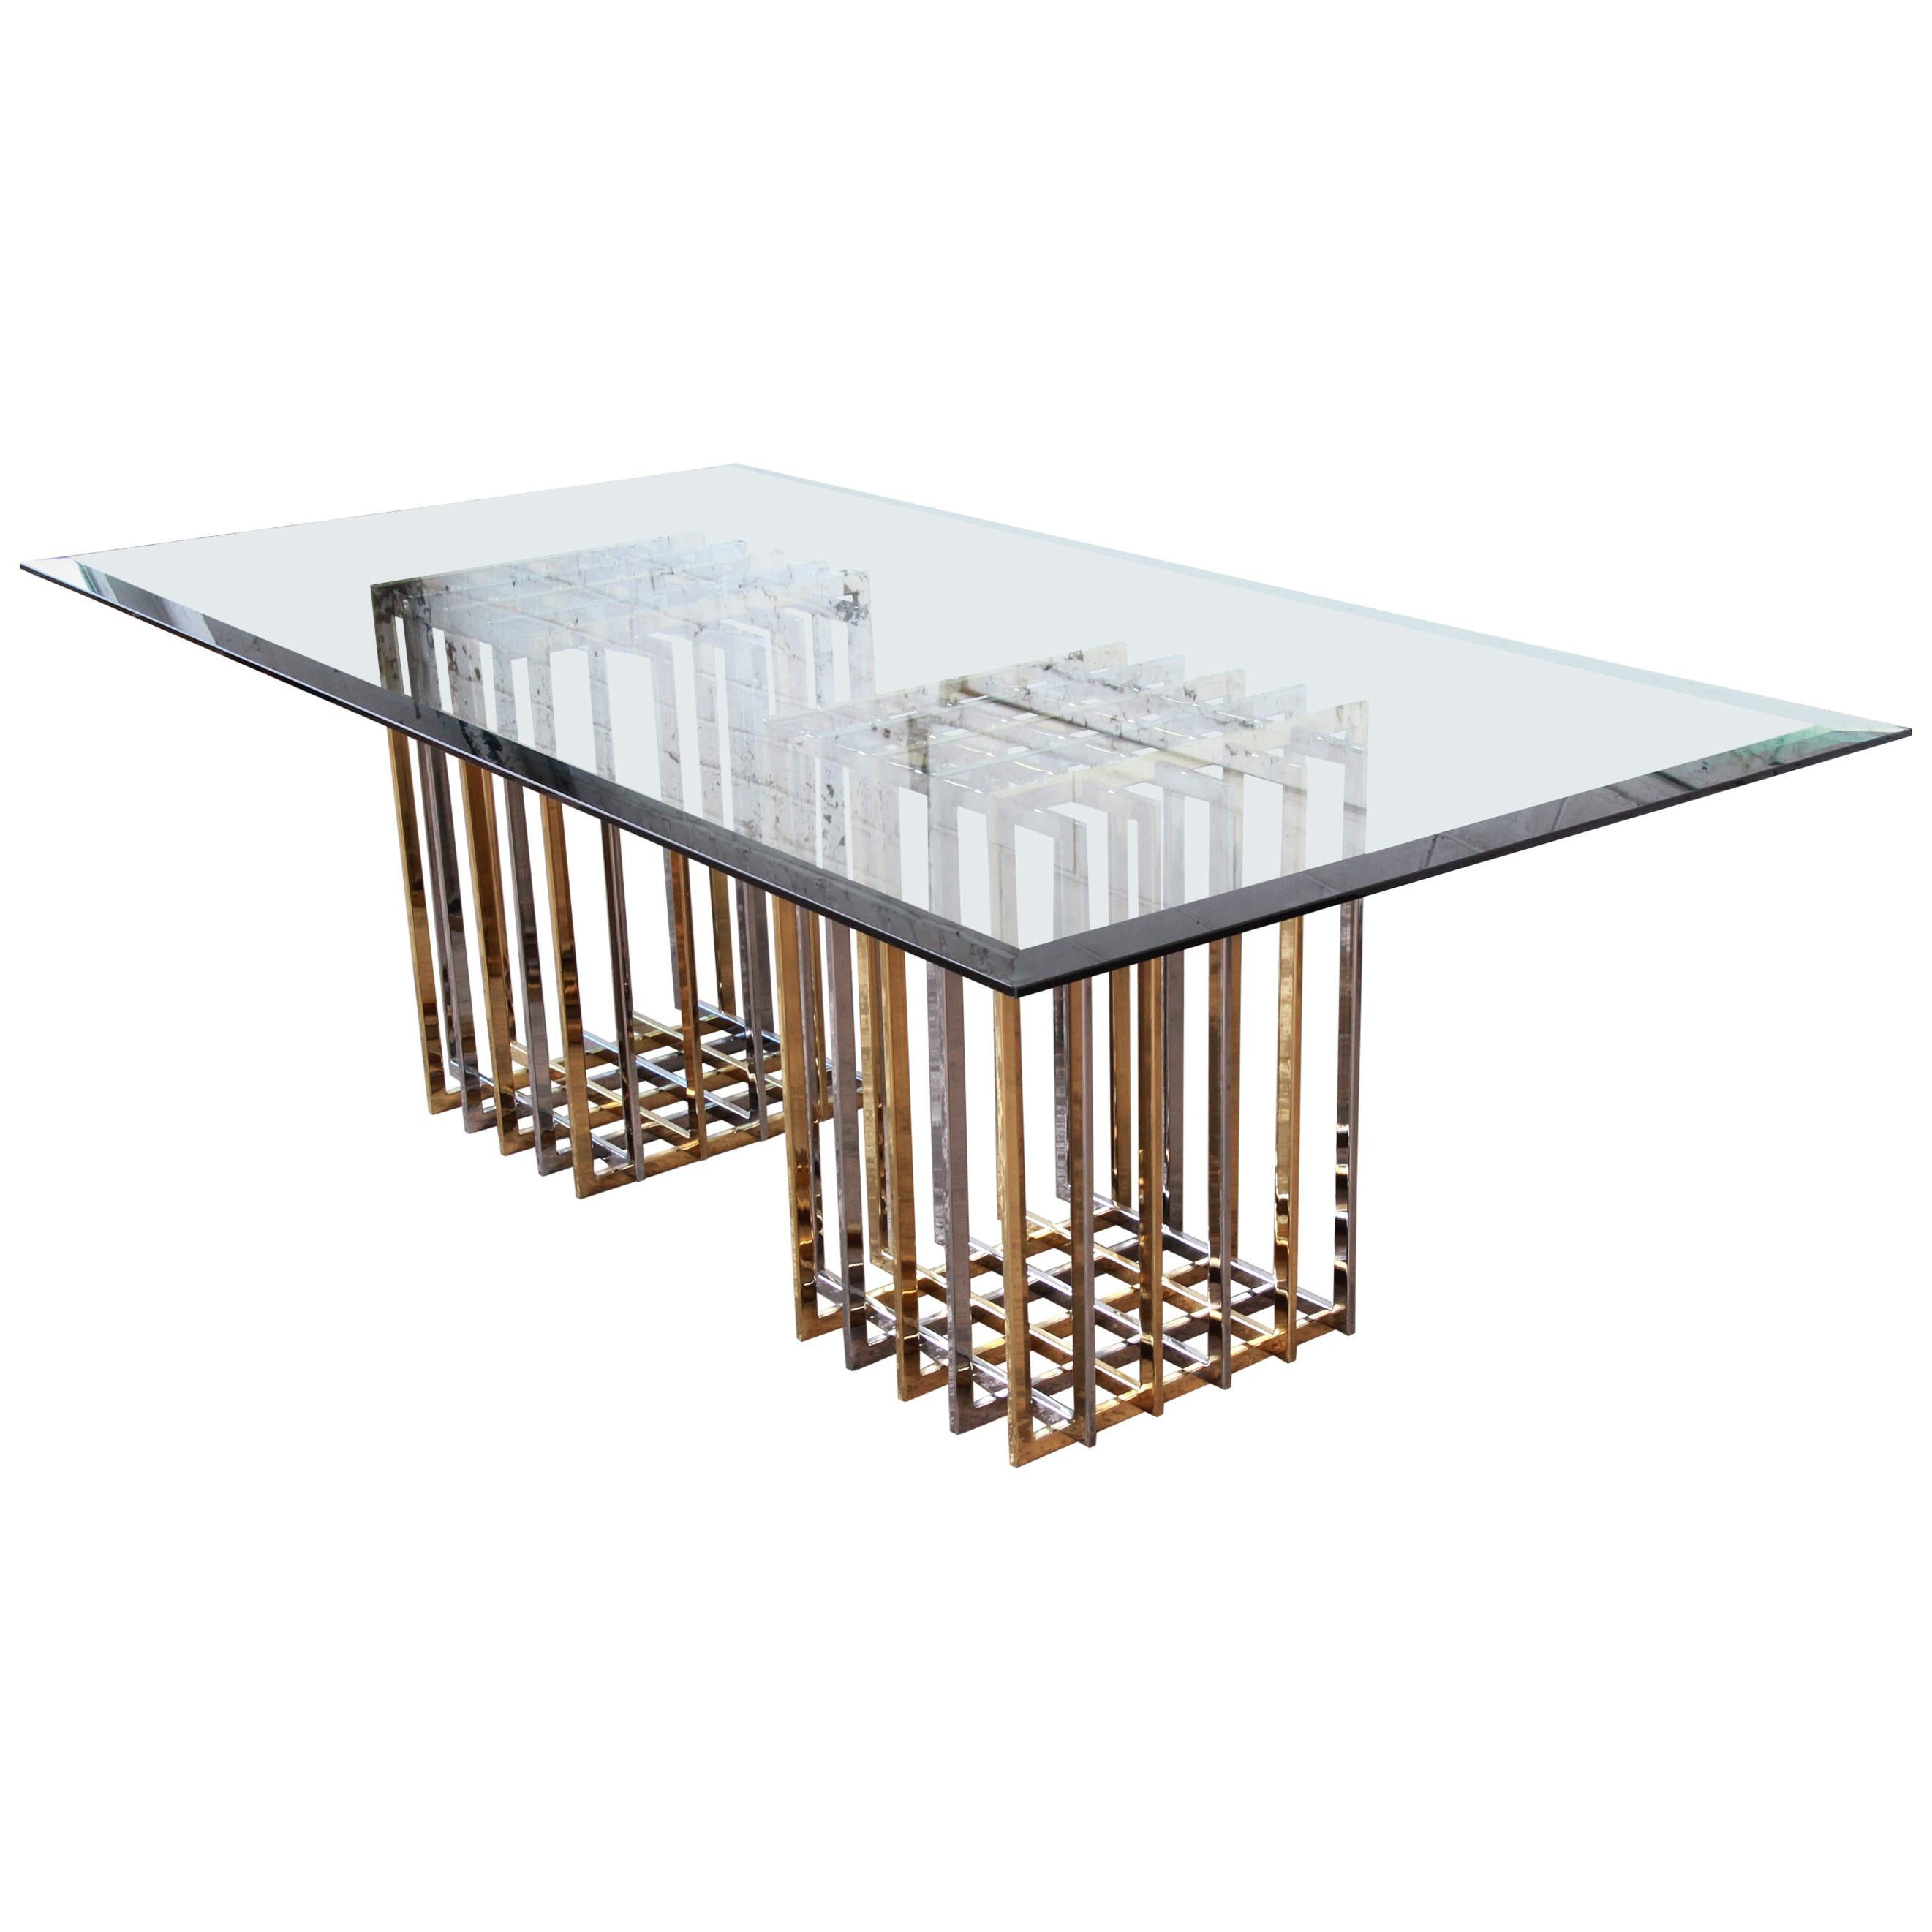 Pierre Cardin Hollywood Regency Dining Table in Brass, Nickel, and Glass, 1970s